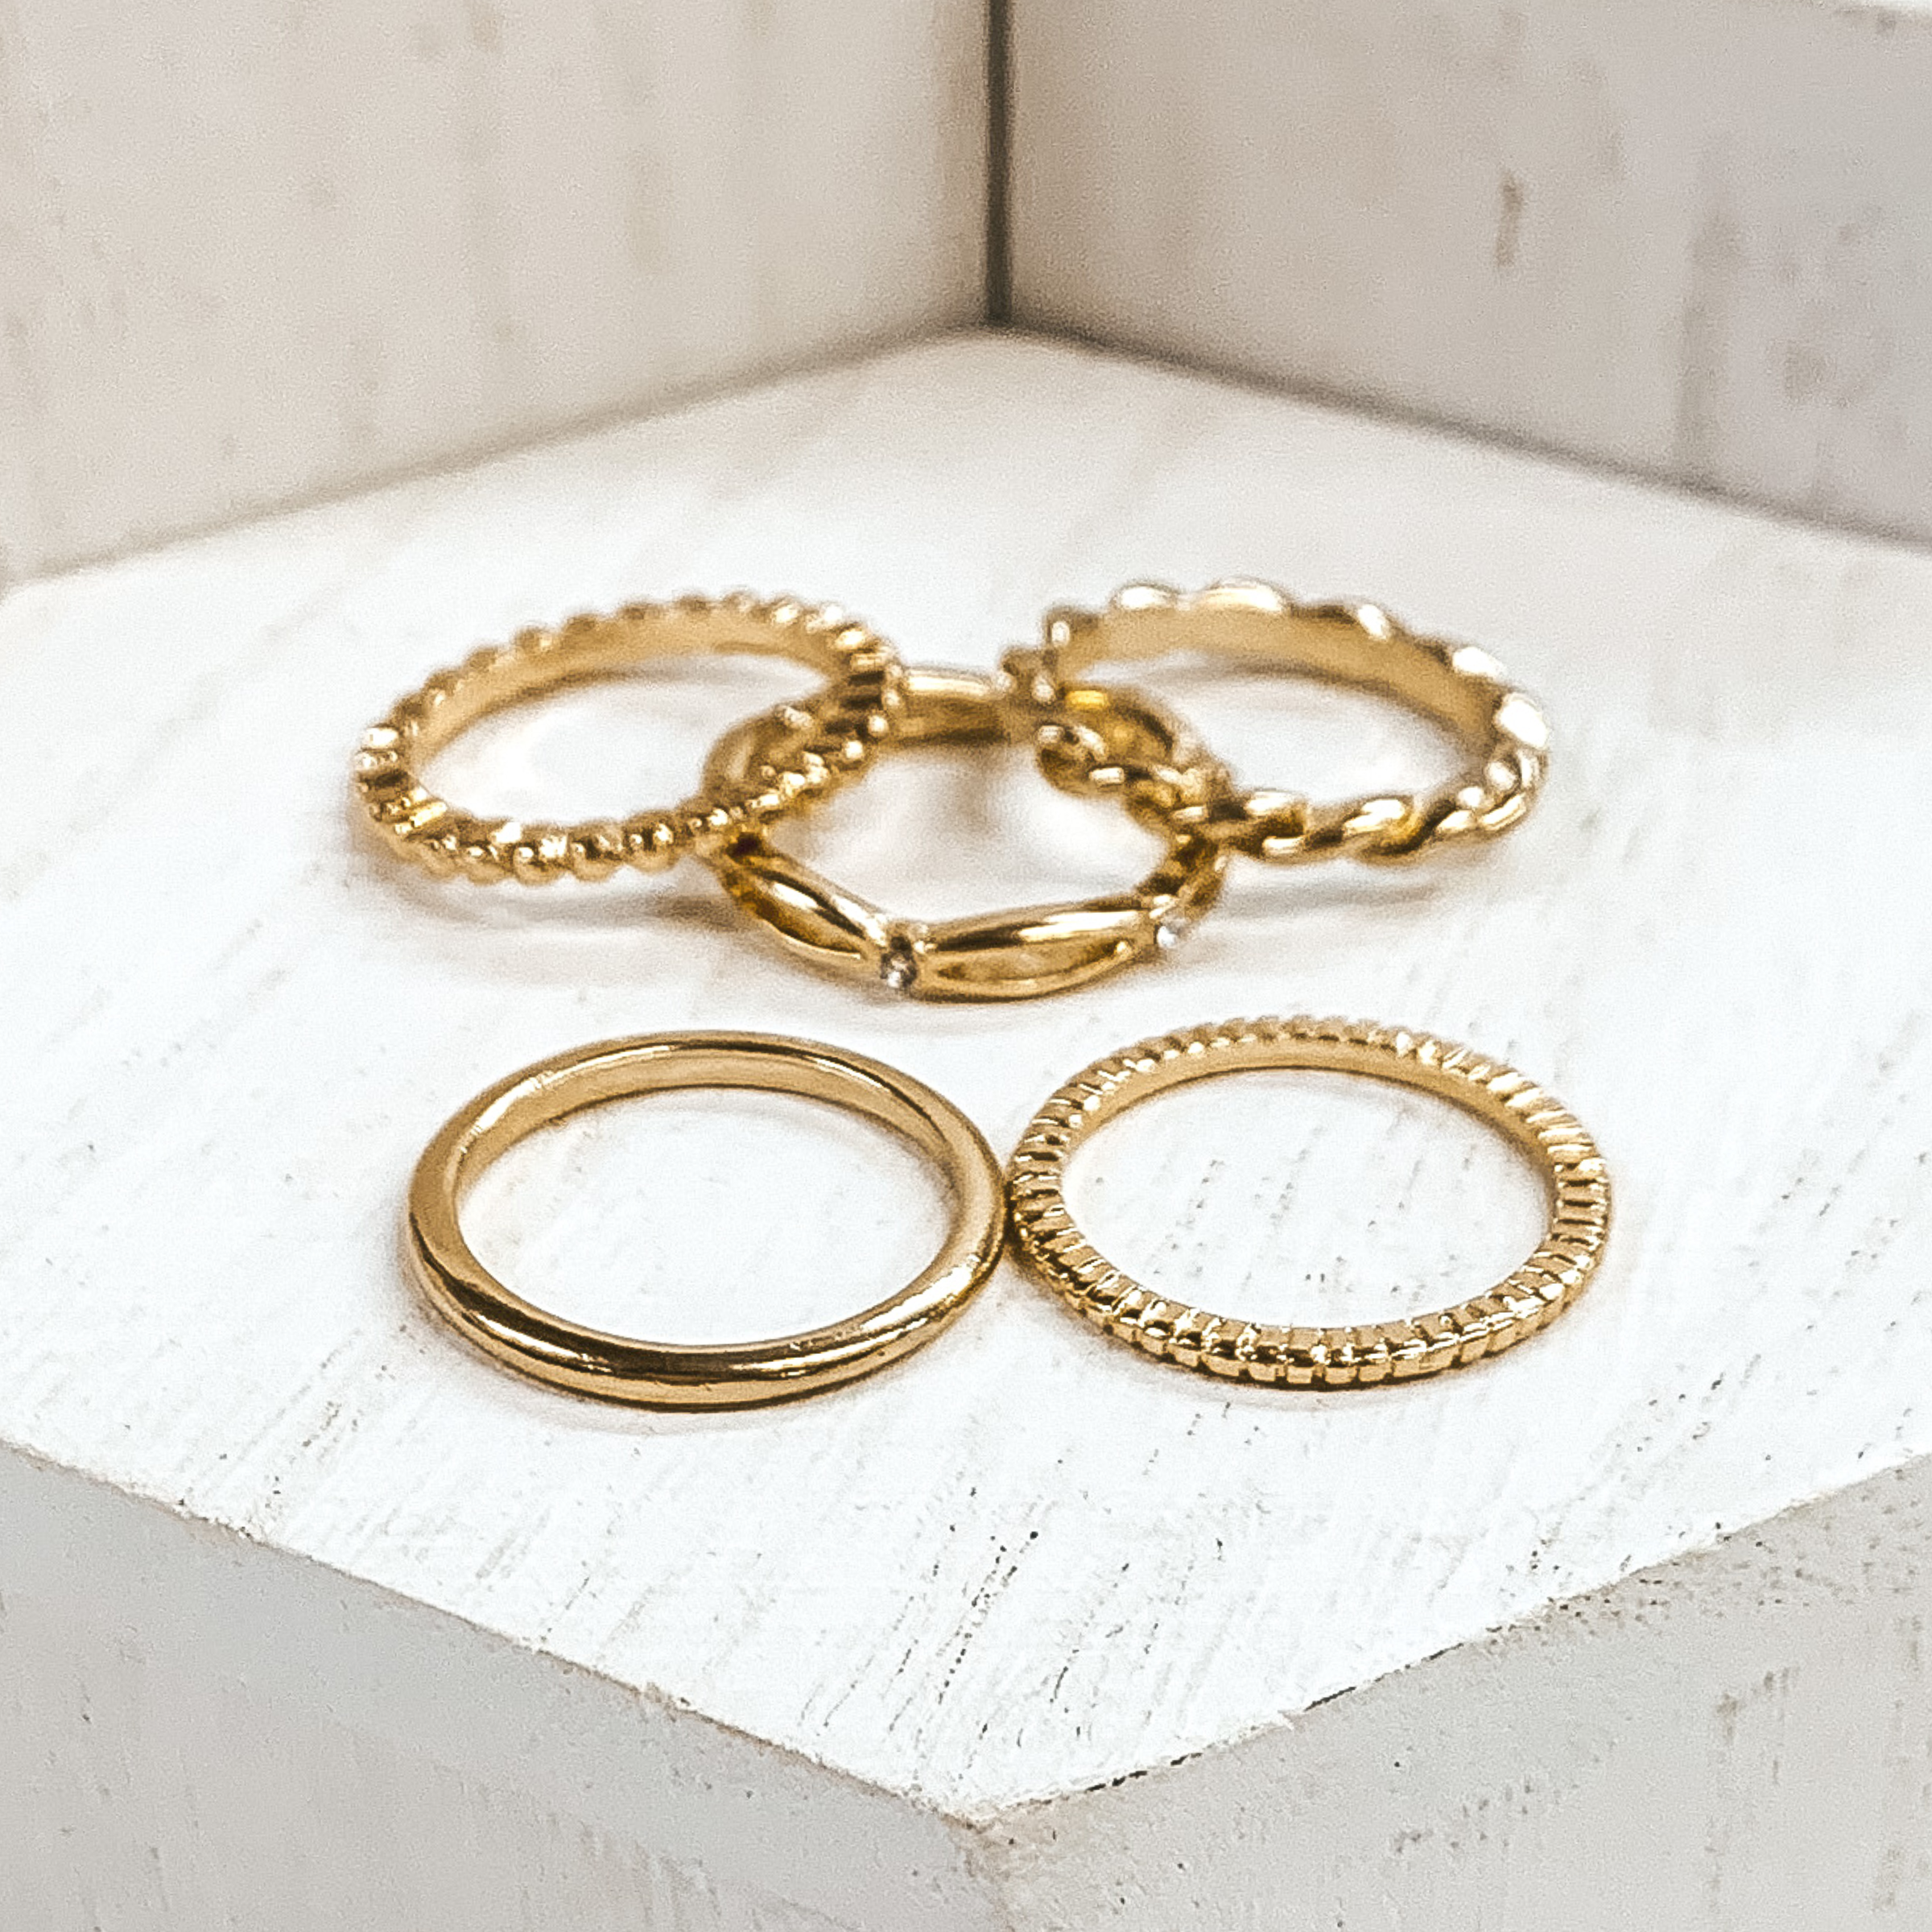 Set of five gold rings. One is a plain band, one is a bubble band, one is a twisted band, and the other two are textured bands. These rings are pictured on white blocks. 